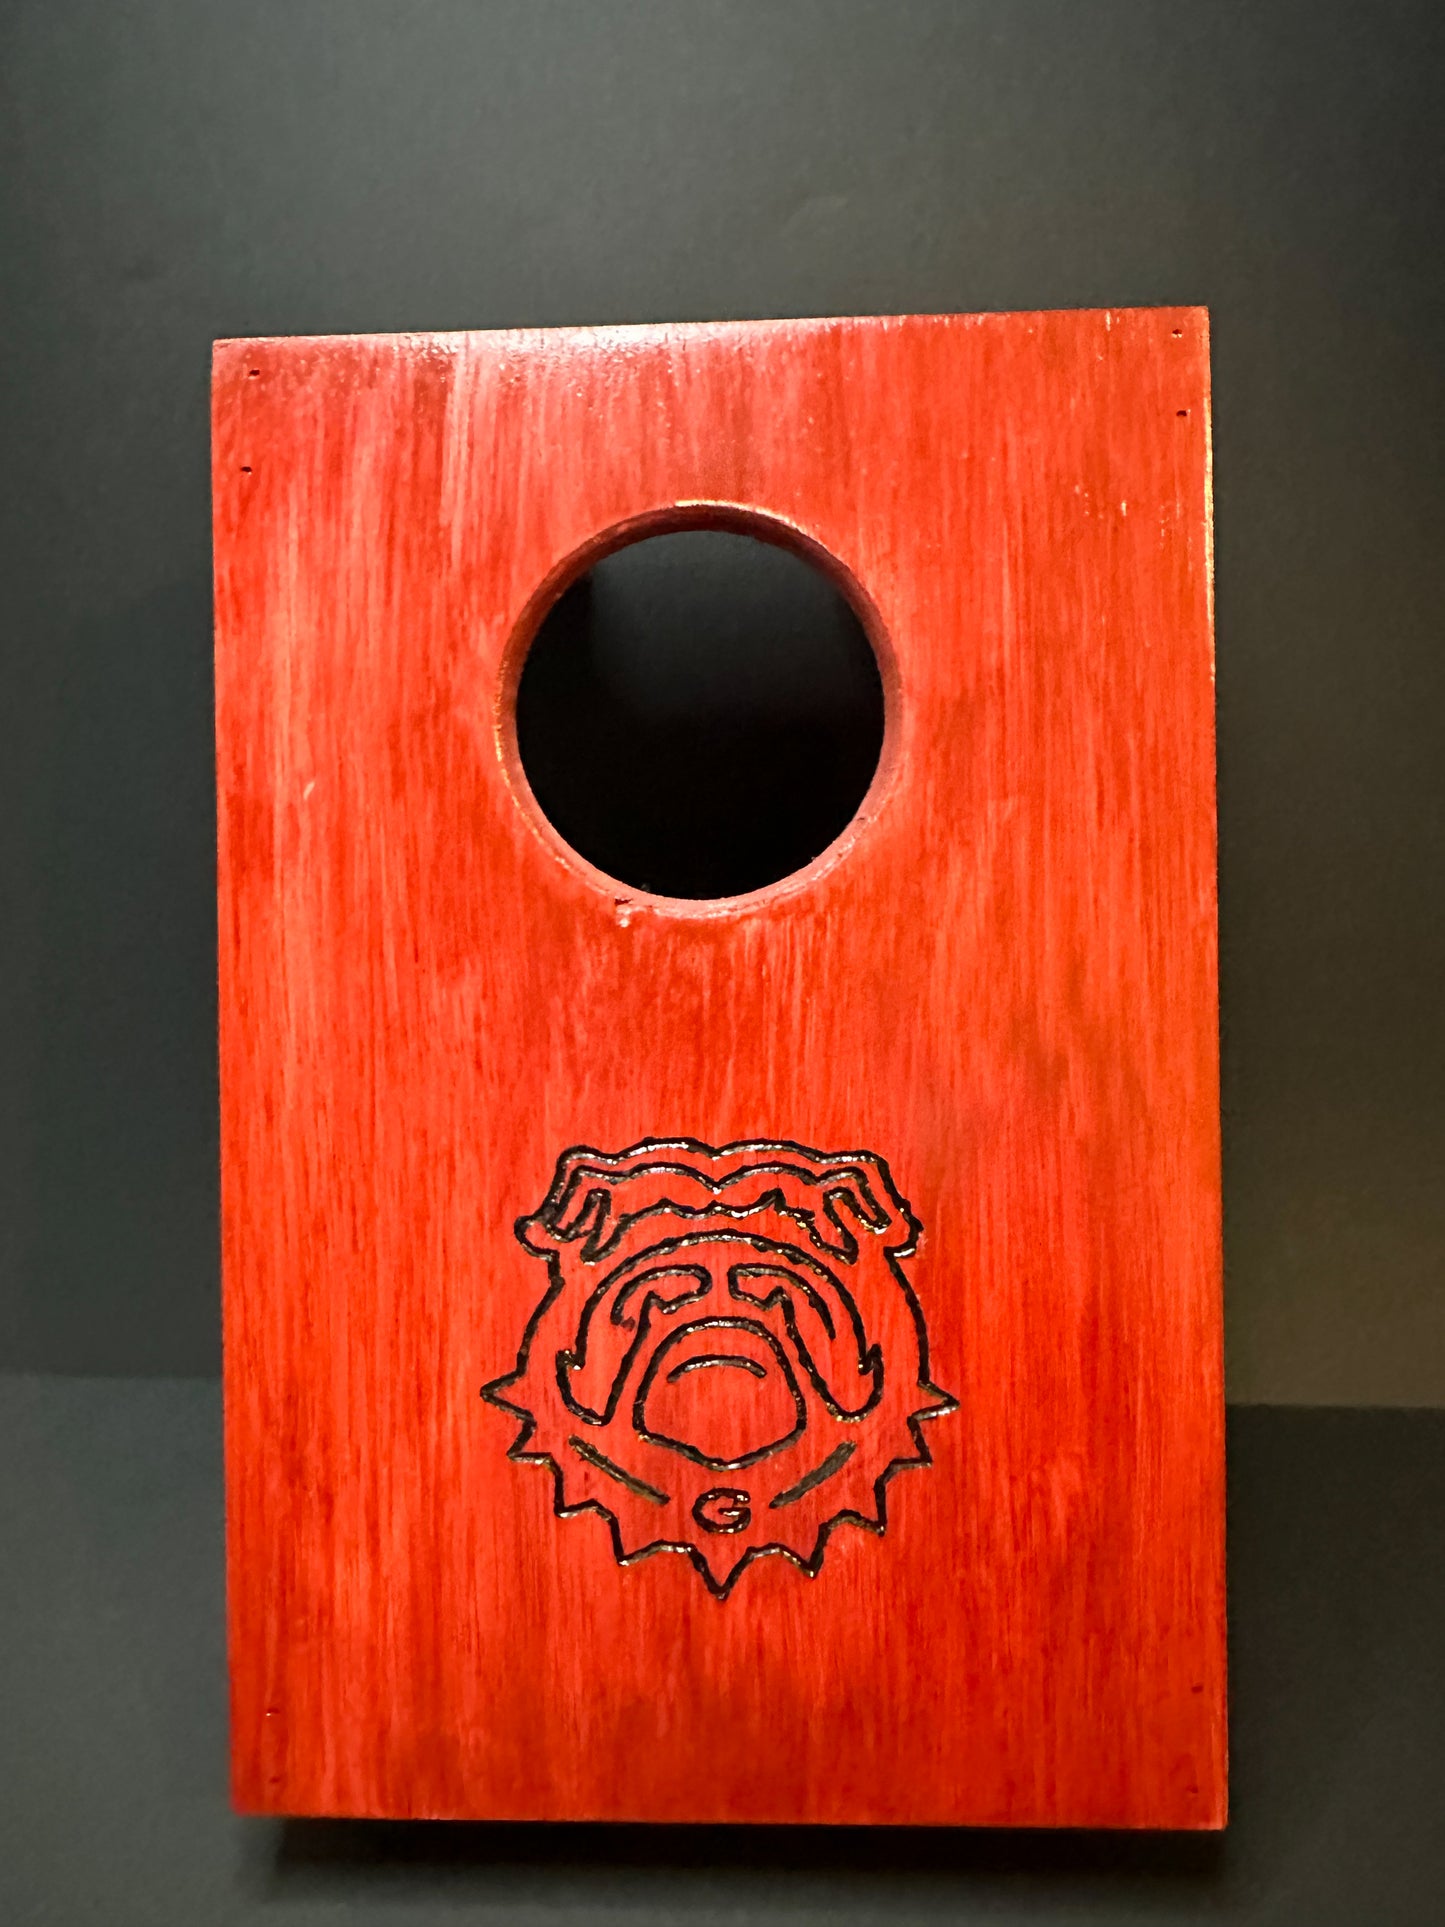 University of Georgia Tabletop Cornhole Board Set - Stained and Etched